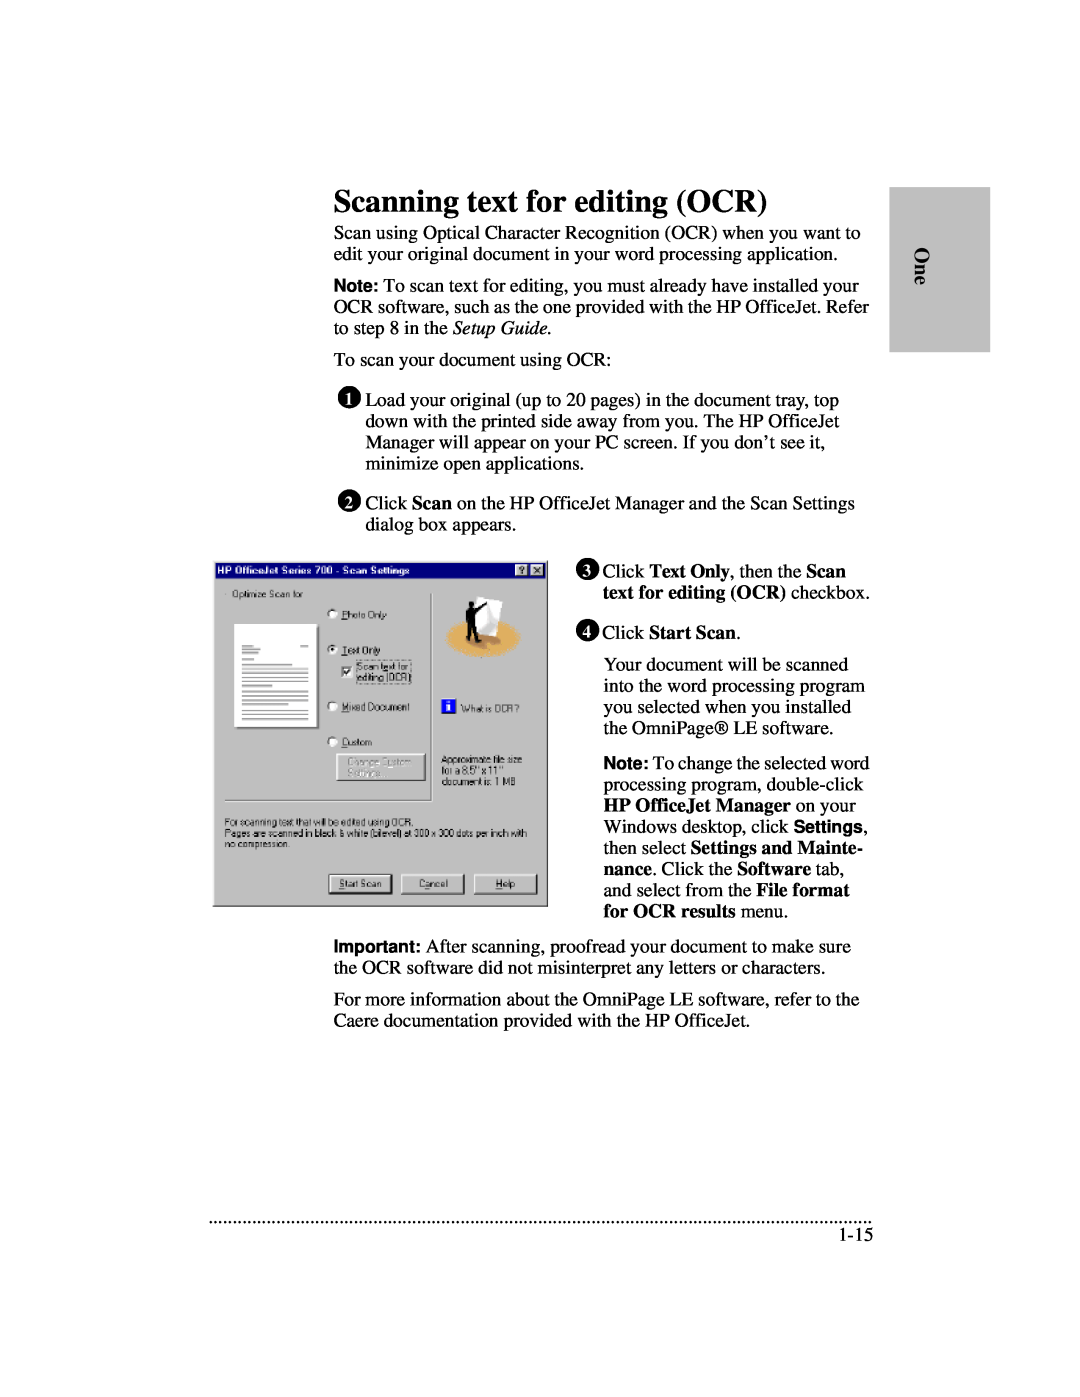 HP 700 manual Scanning text for editing OCR, Click Start Scan 